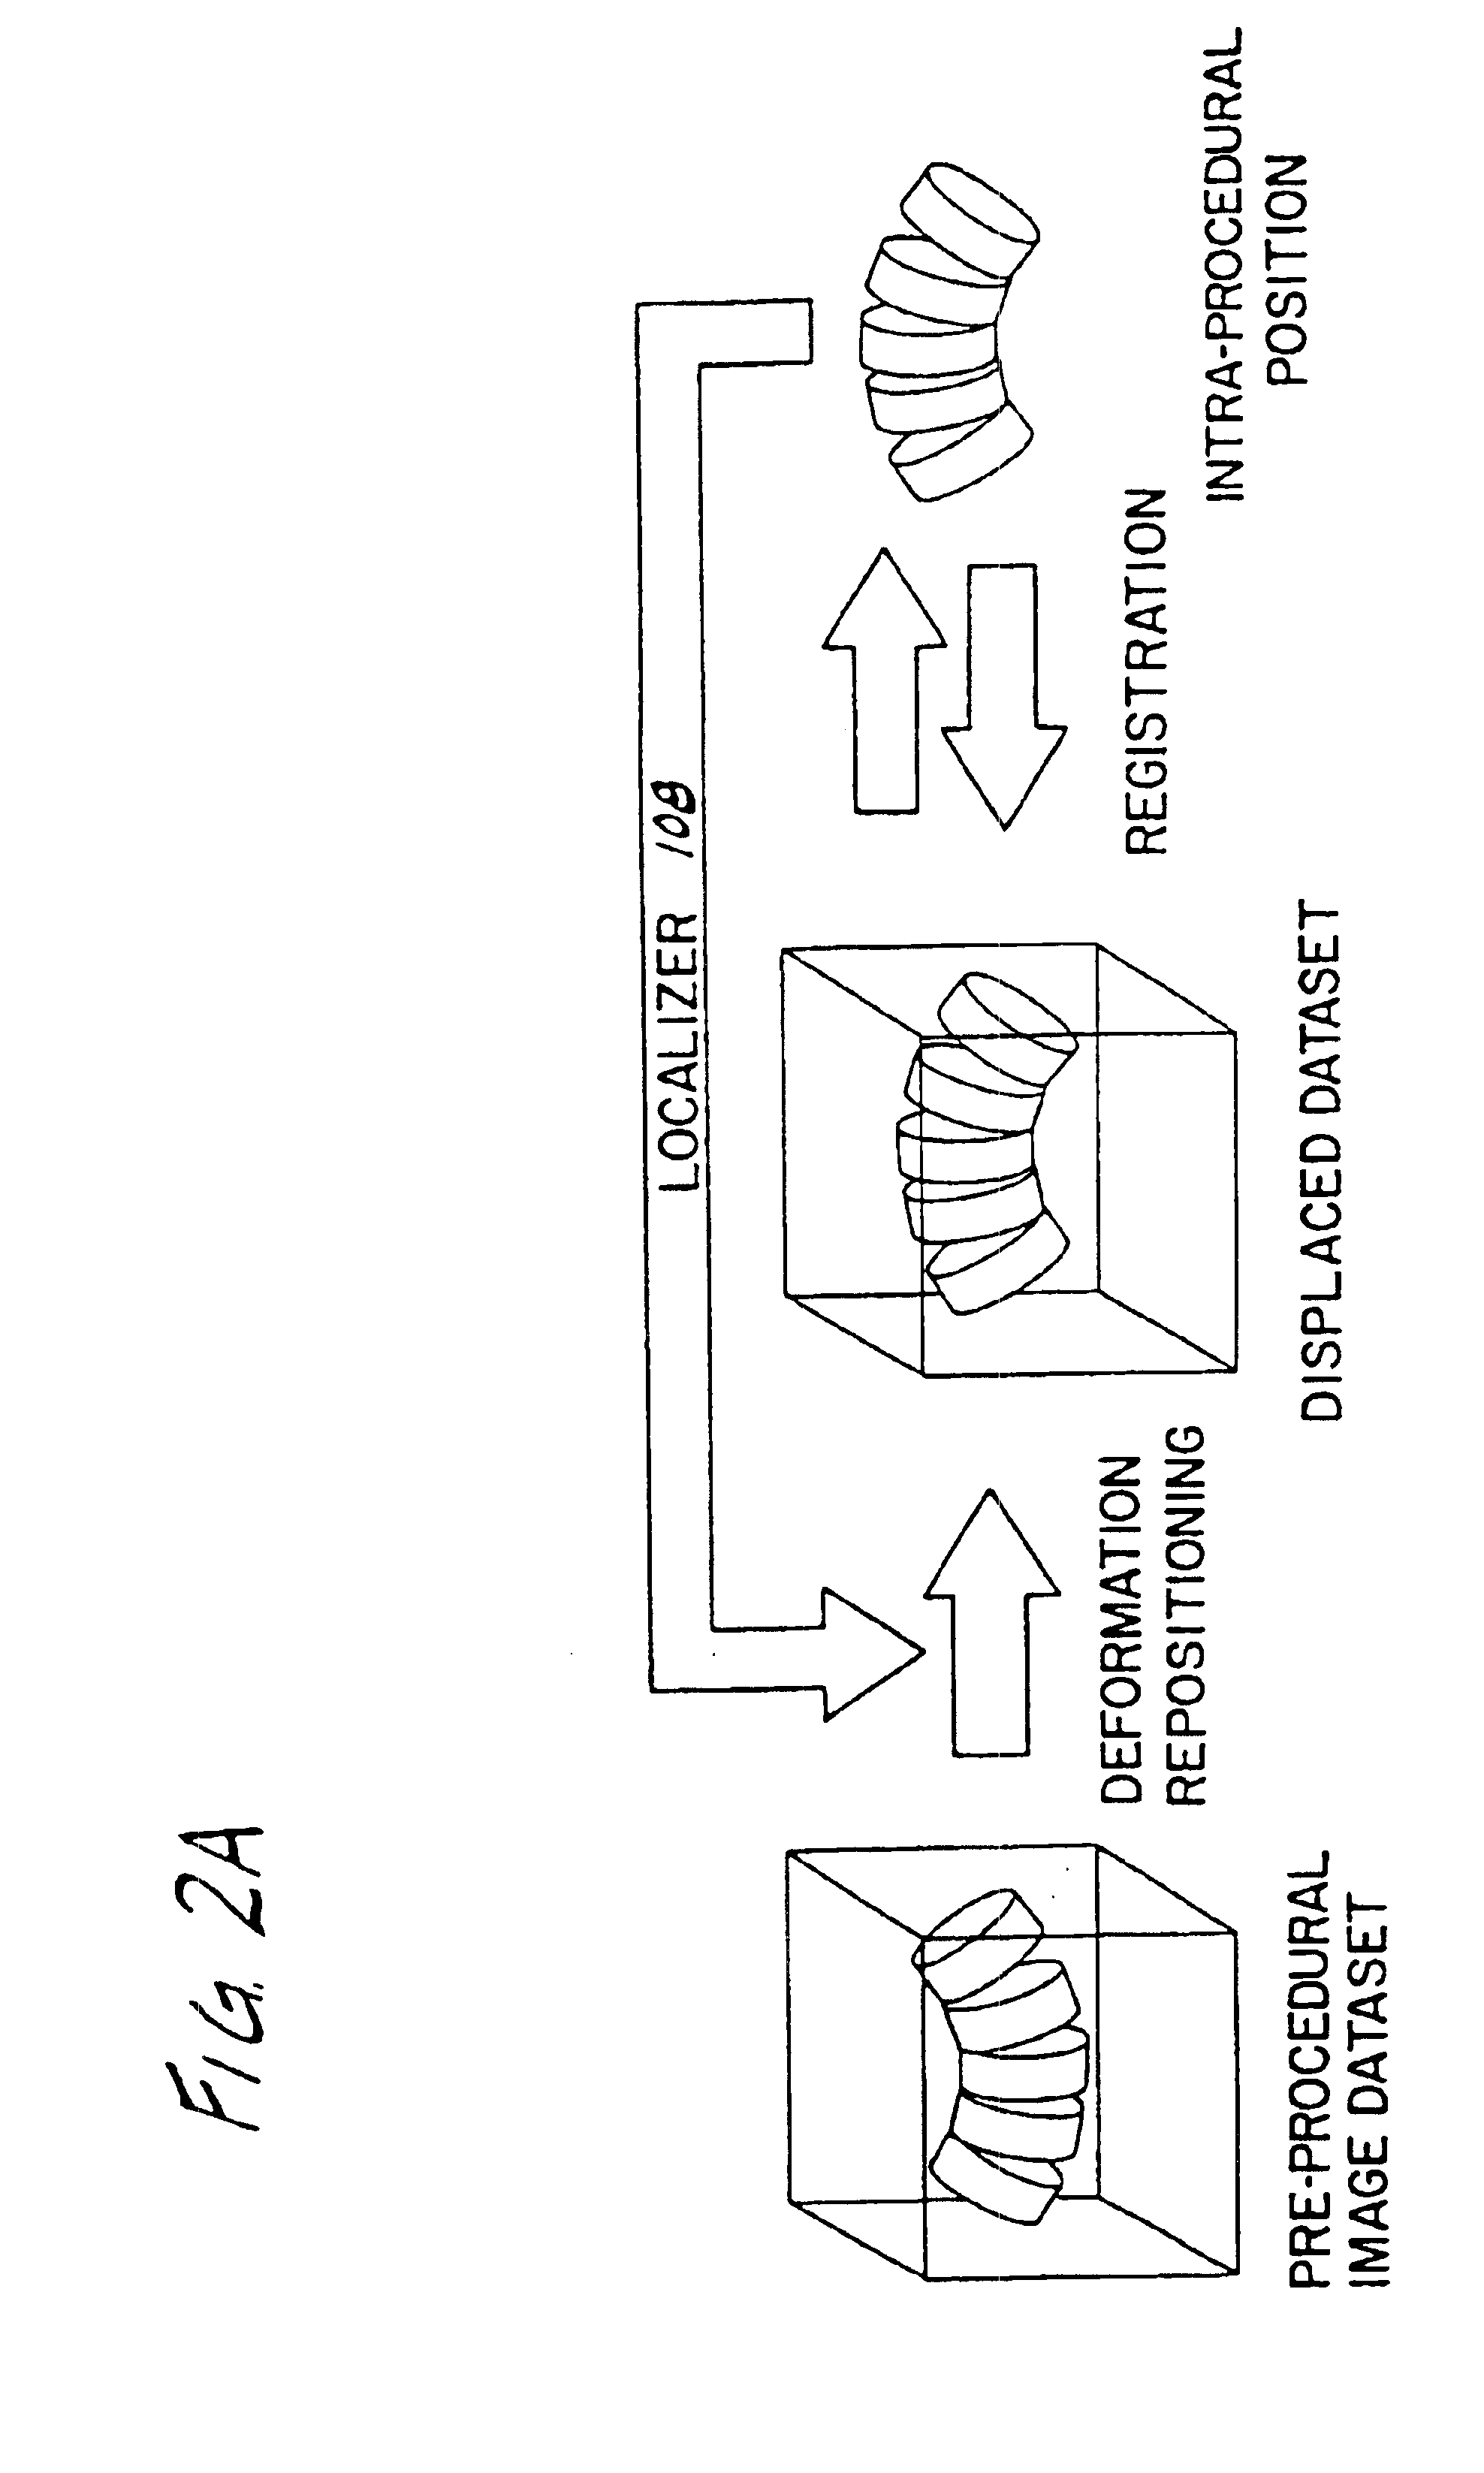 System for use in displaying images of a body part